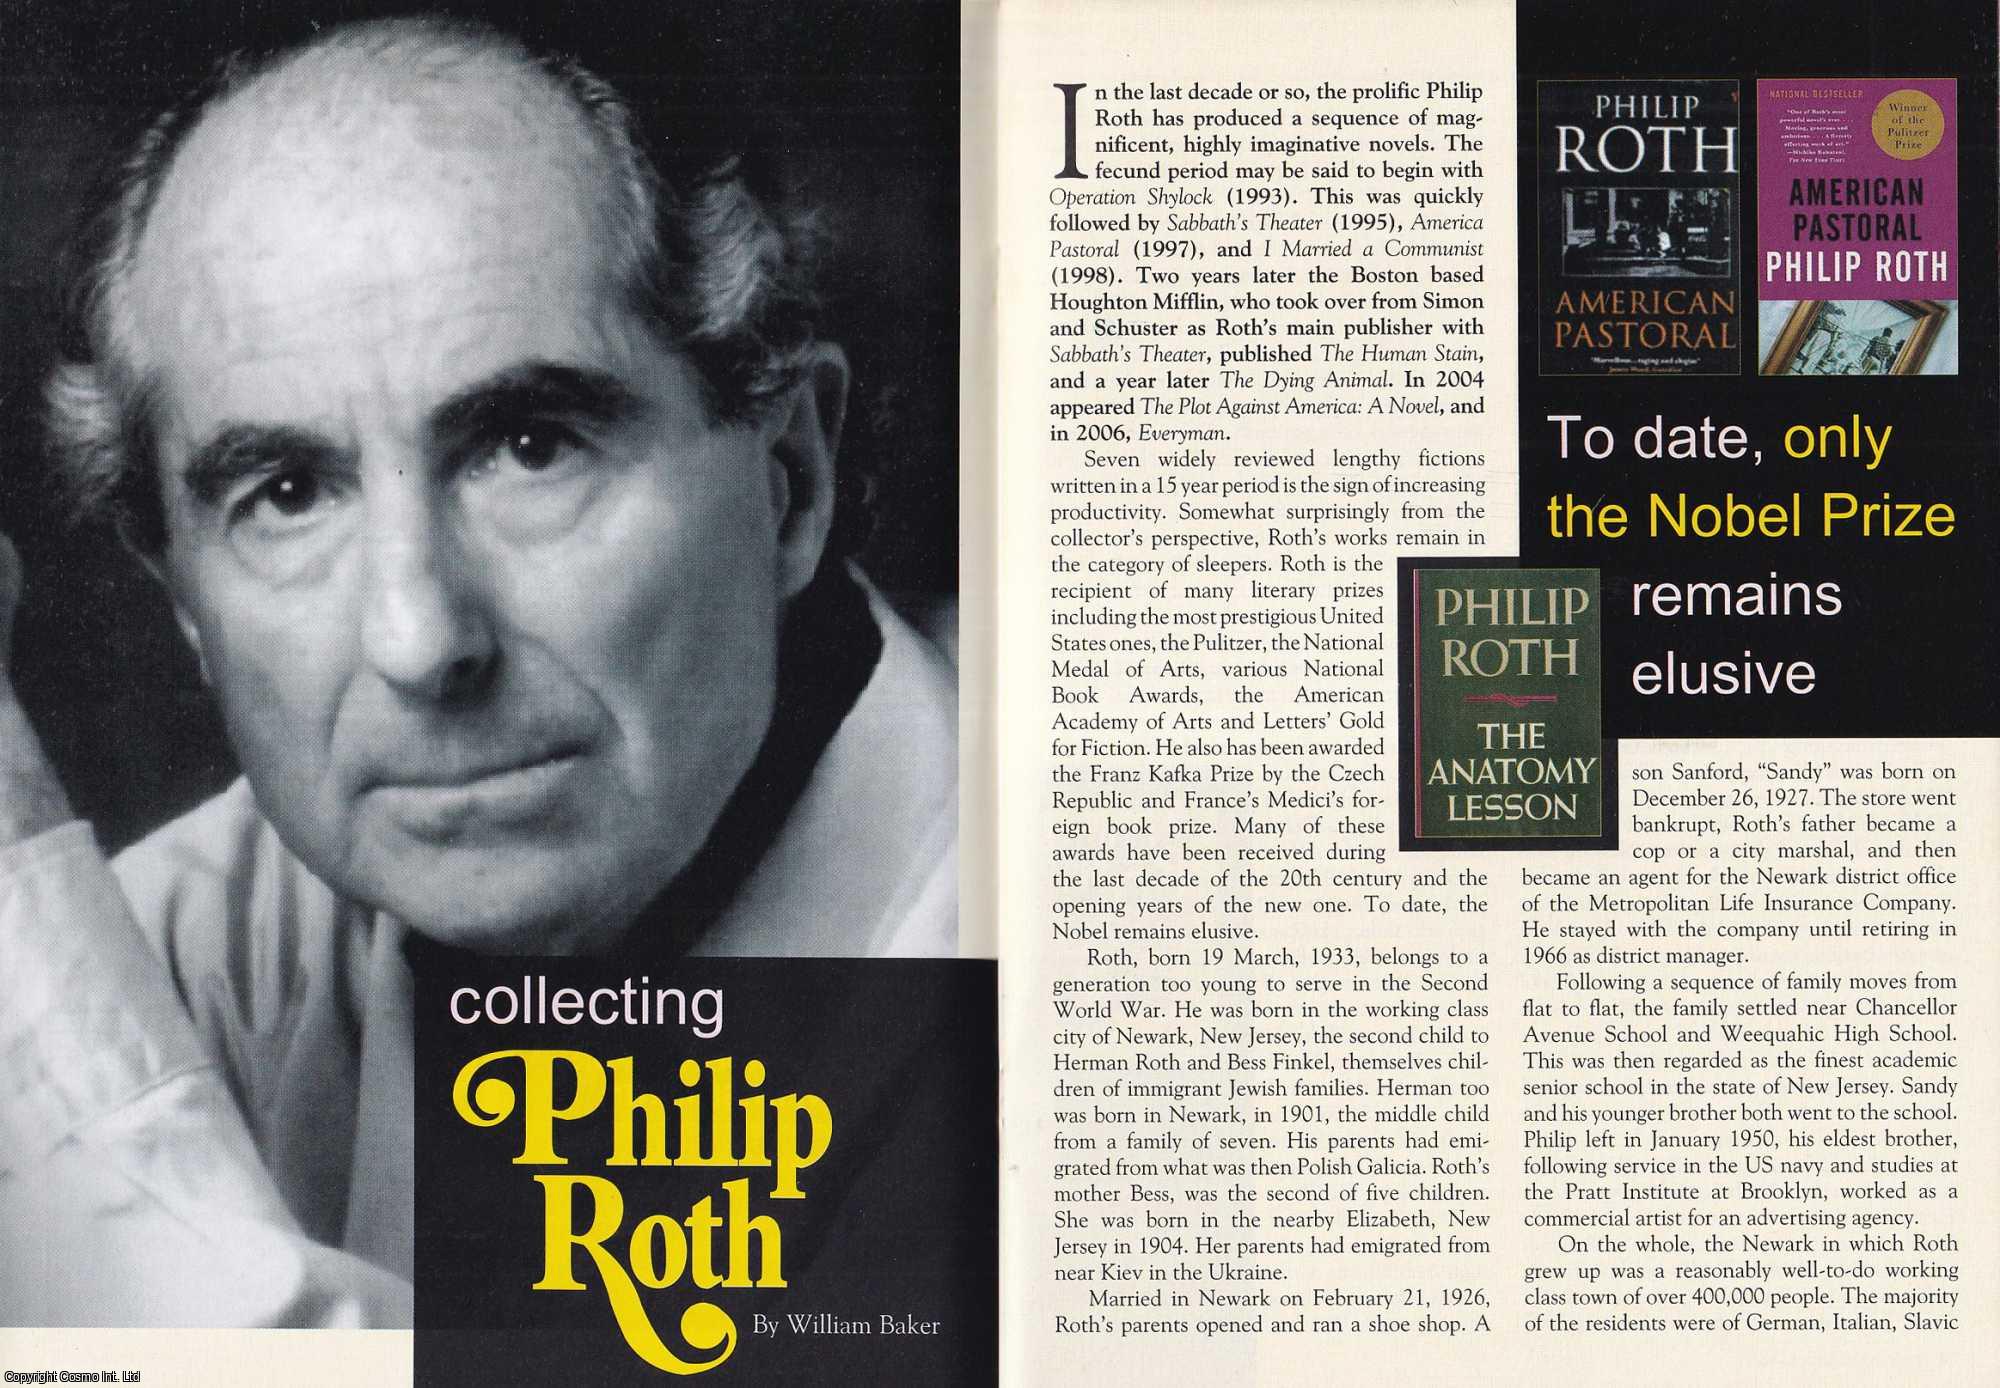 William Baker - Collecting Philip Roth. This is an original article separated from an issue of The Book & Magazine Collector publication.